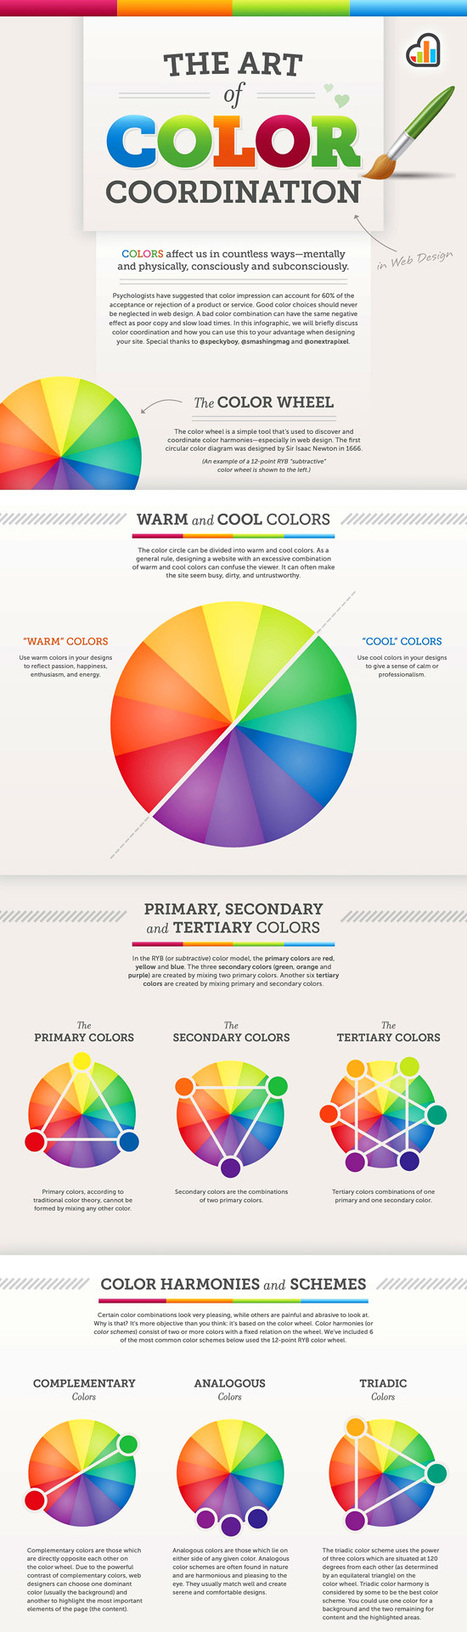 The Art of Color Coordination | Drawing References and Resources | Scoop.it